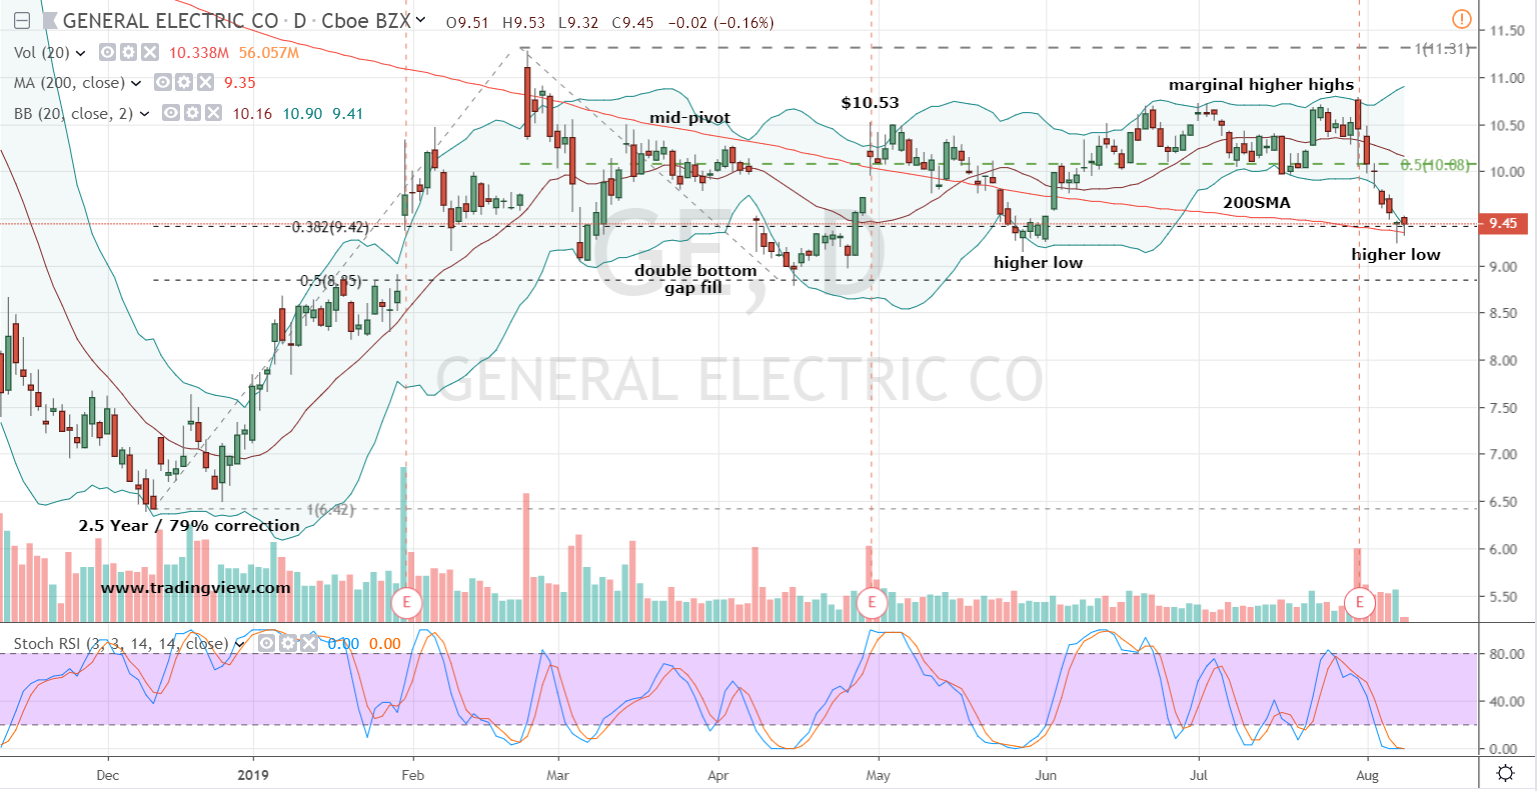 GE Stock Daily Chart